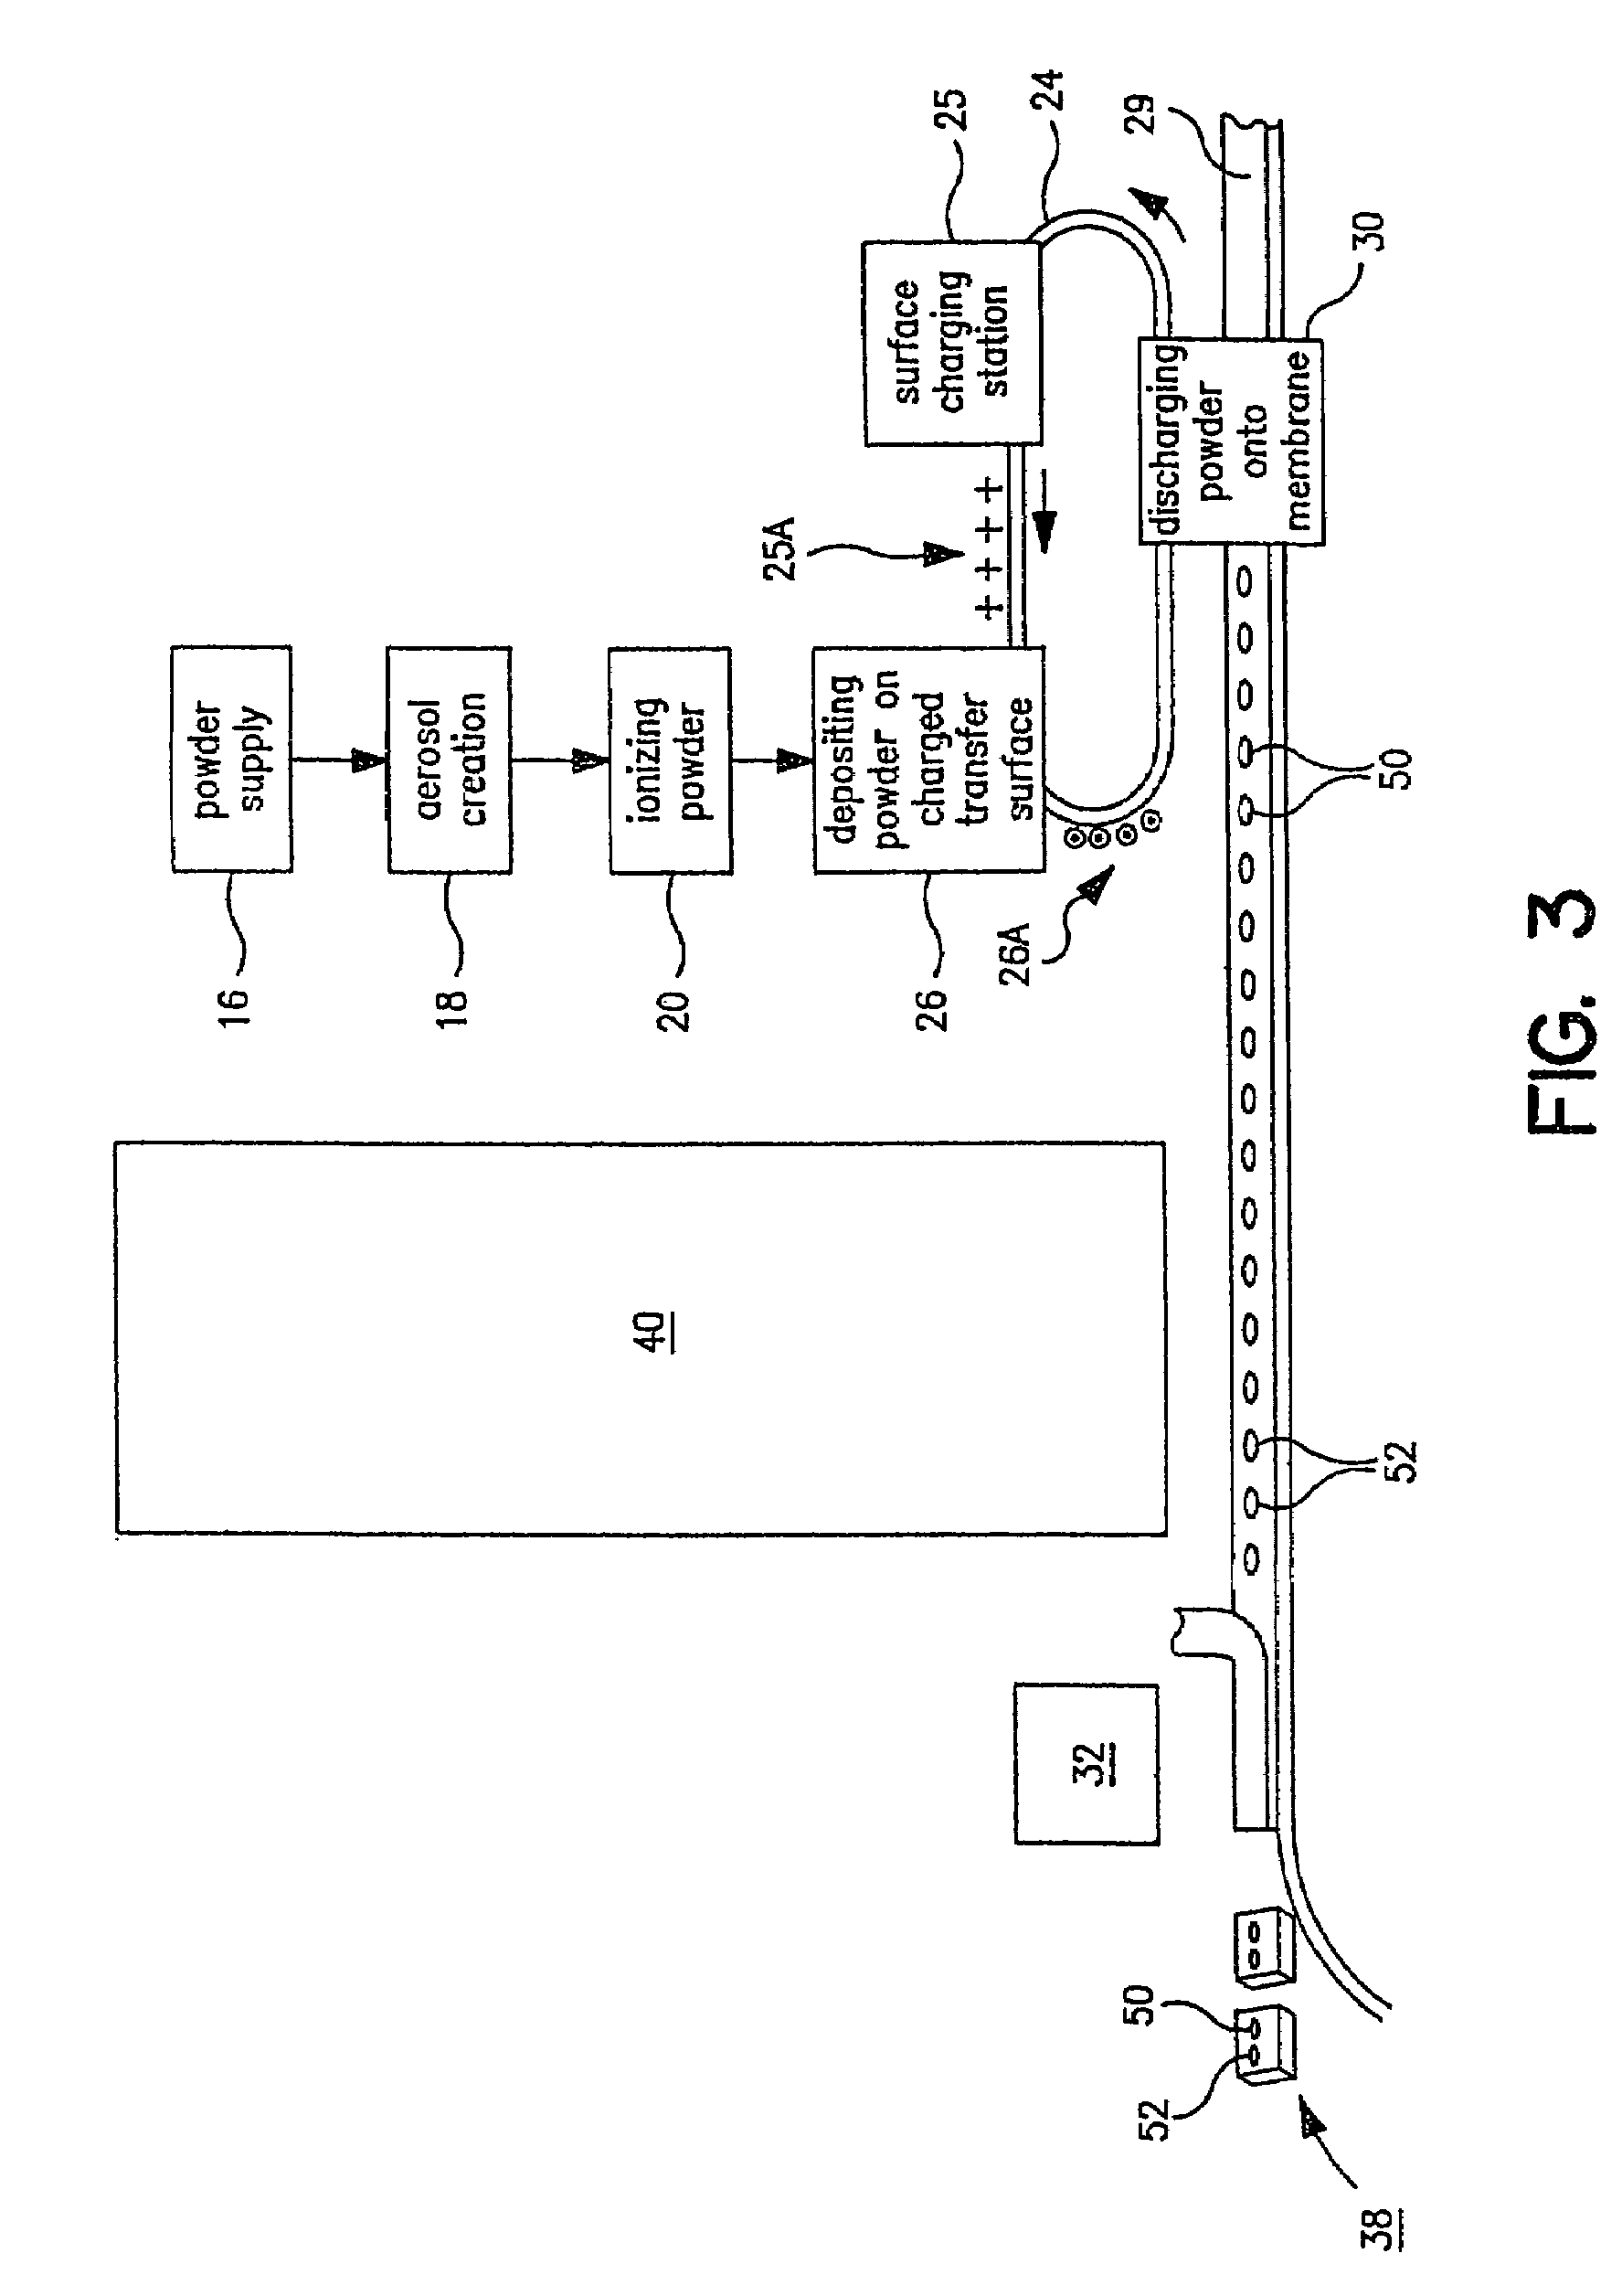 Metering and packaging of controlled release medication